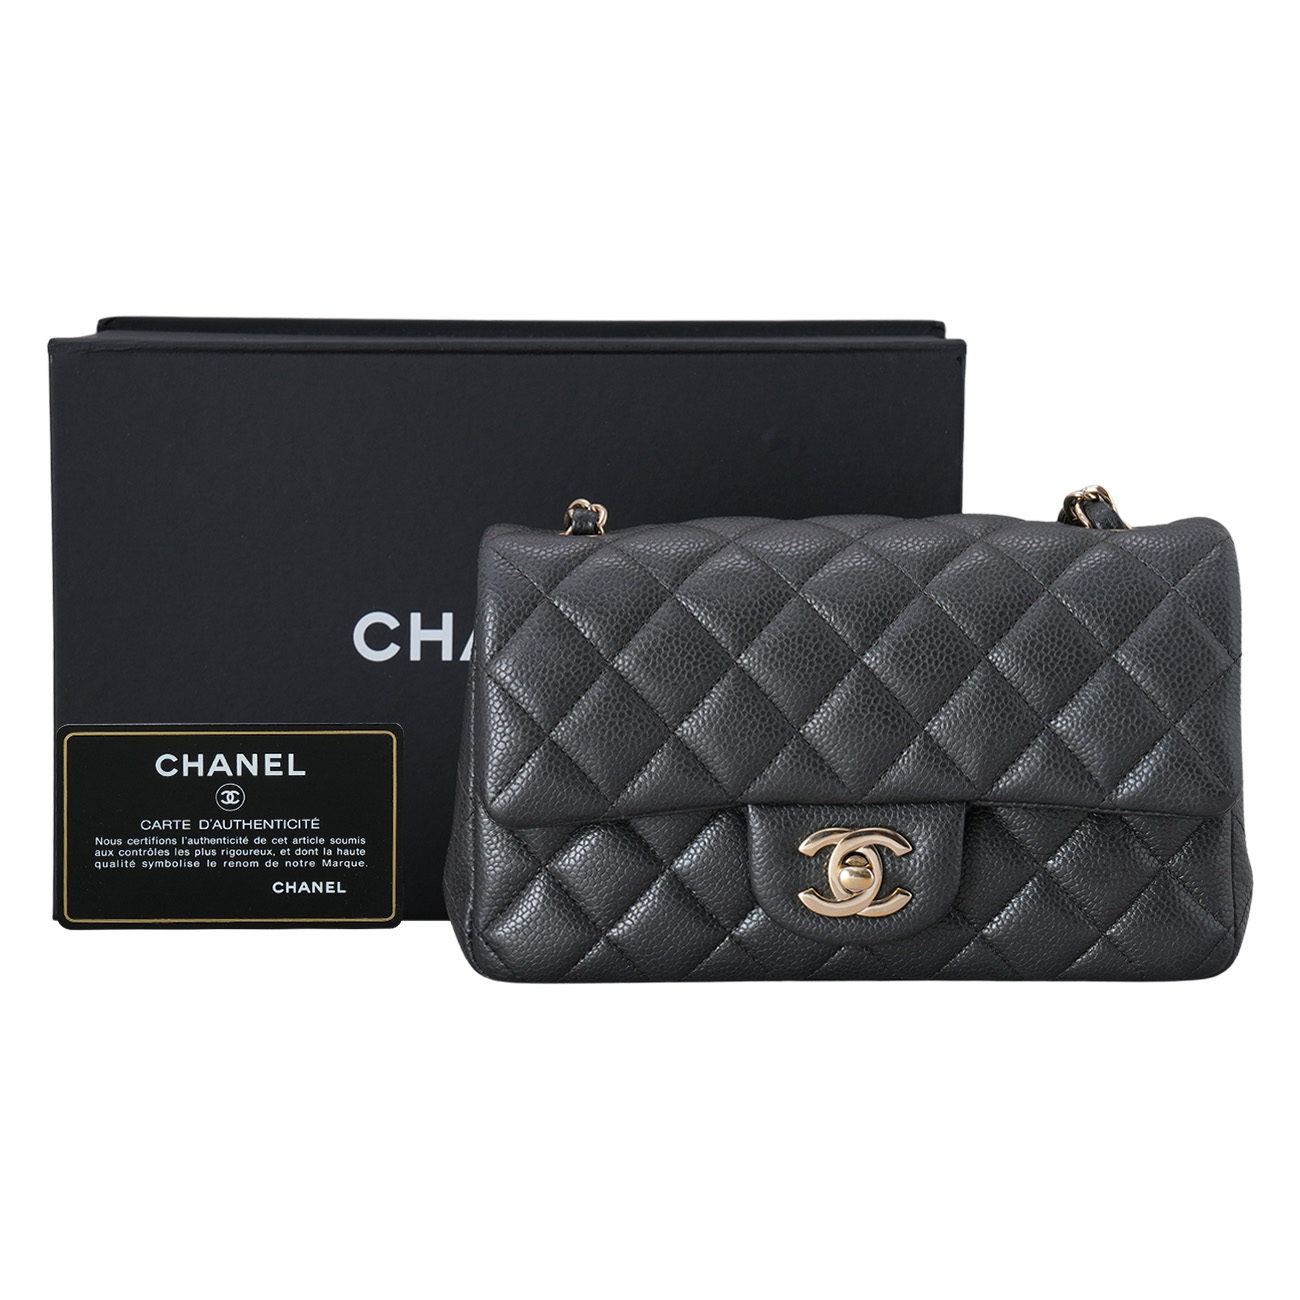 CHANEL(USED)샤넬 캐비어 뉴미니 크로스백